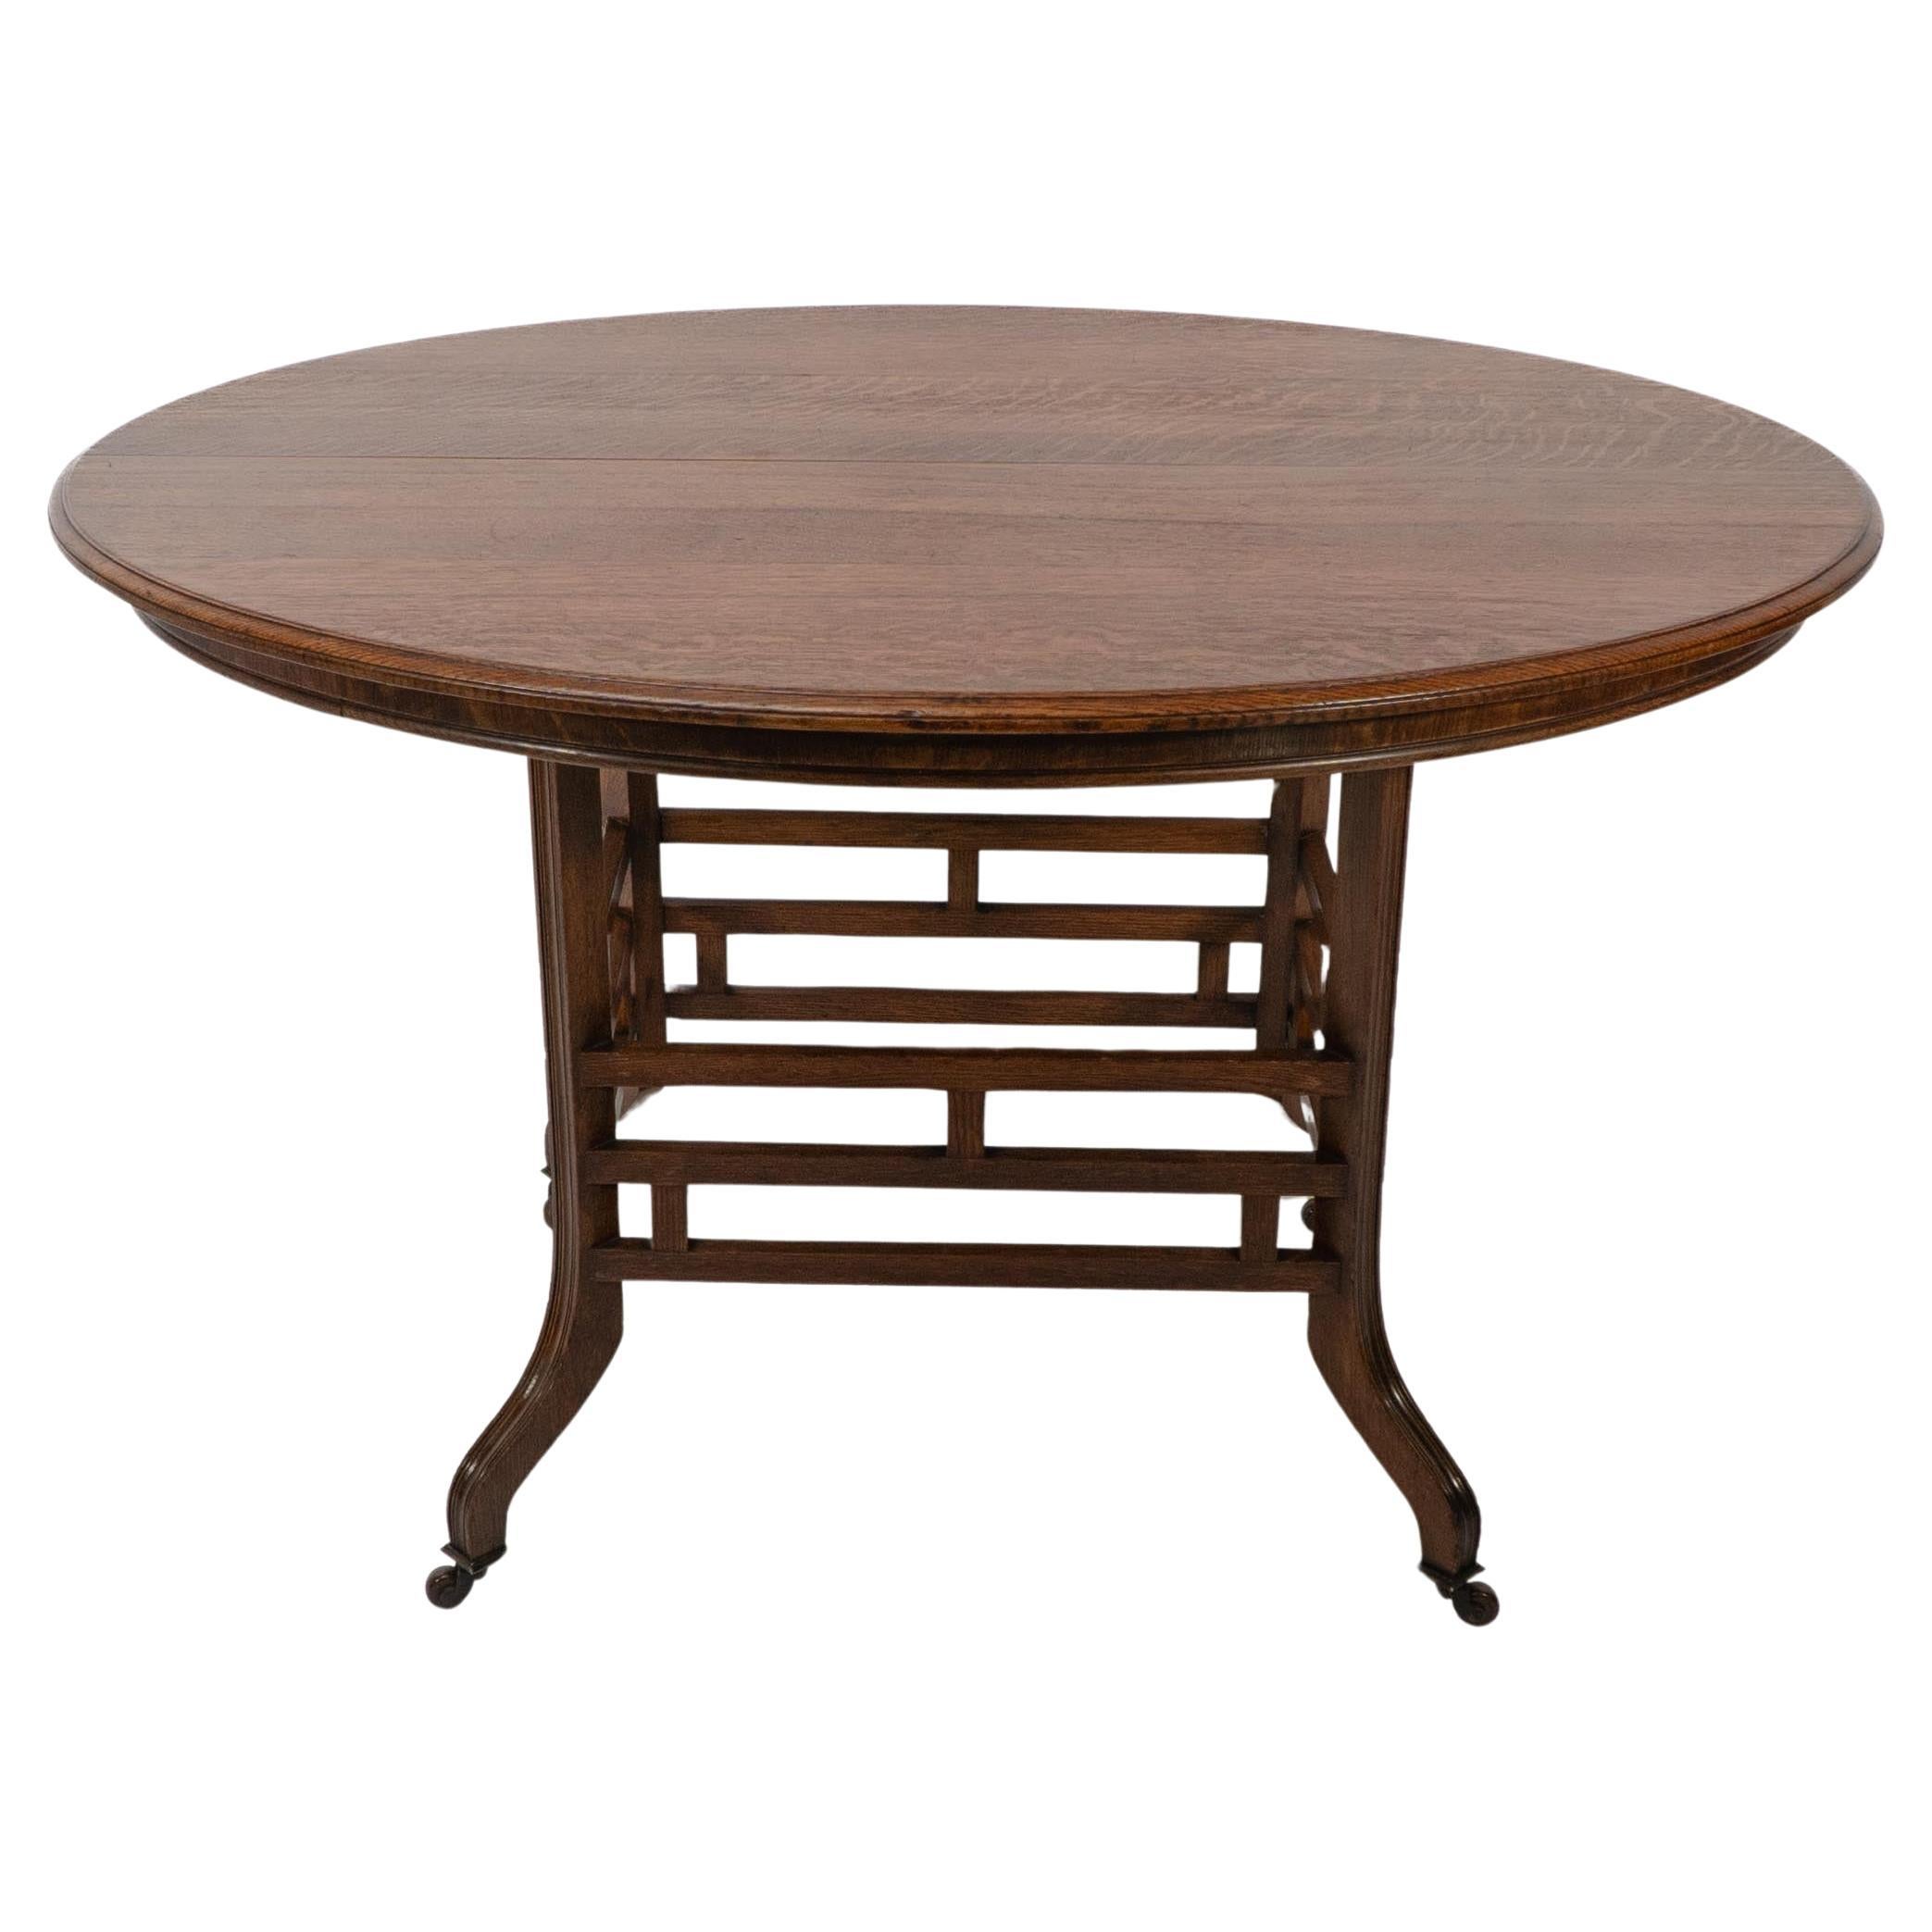 Lambs of Manchester, stamped Lambs to the underside. A rare Anglo-Japanese quarter sawn oak oval centre table with wonderful wild figuring to the top. The four legs with scribed tramline decoration to the outer edges united by an intricate lattice